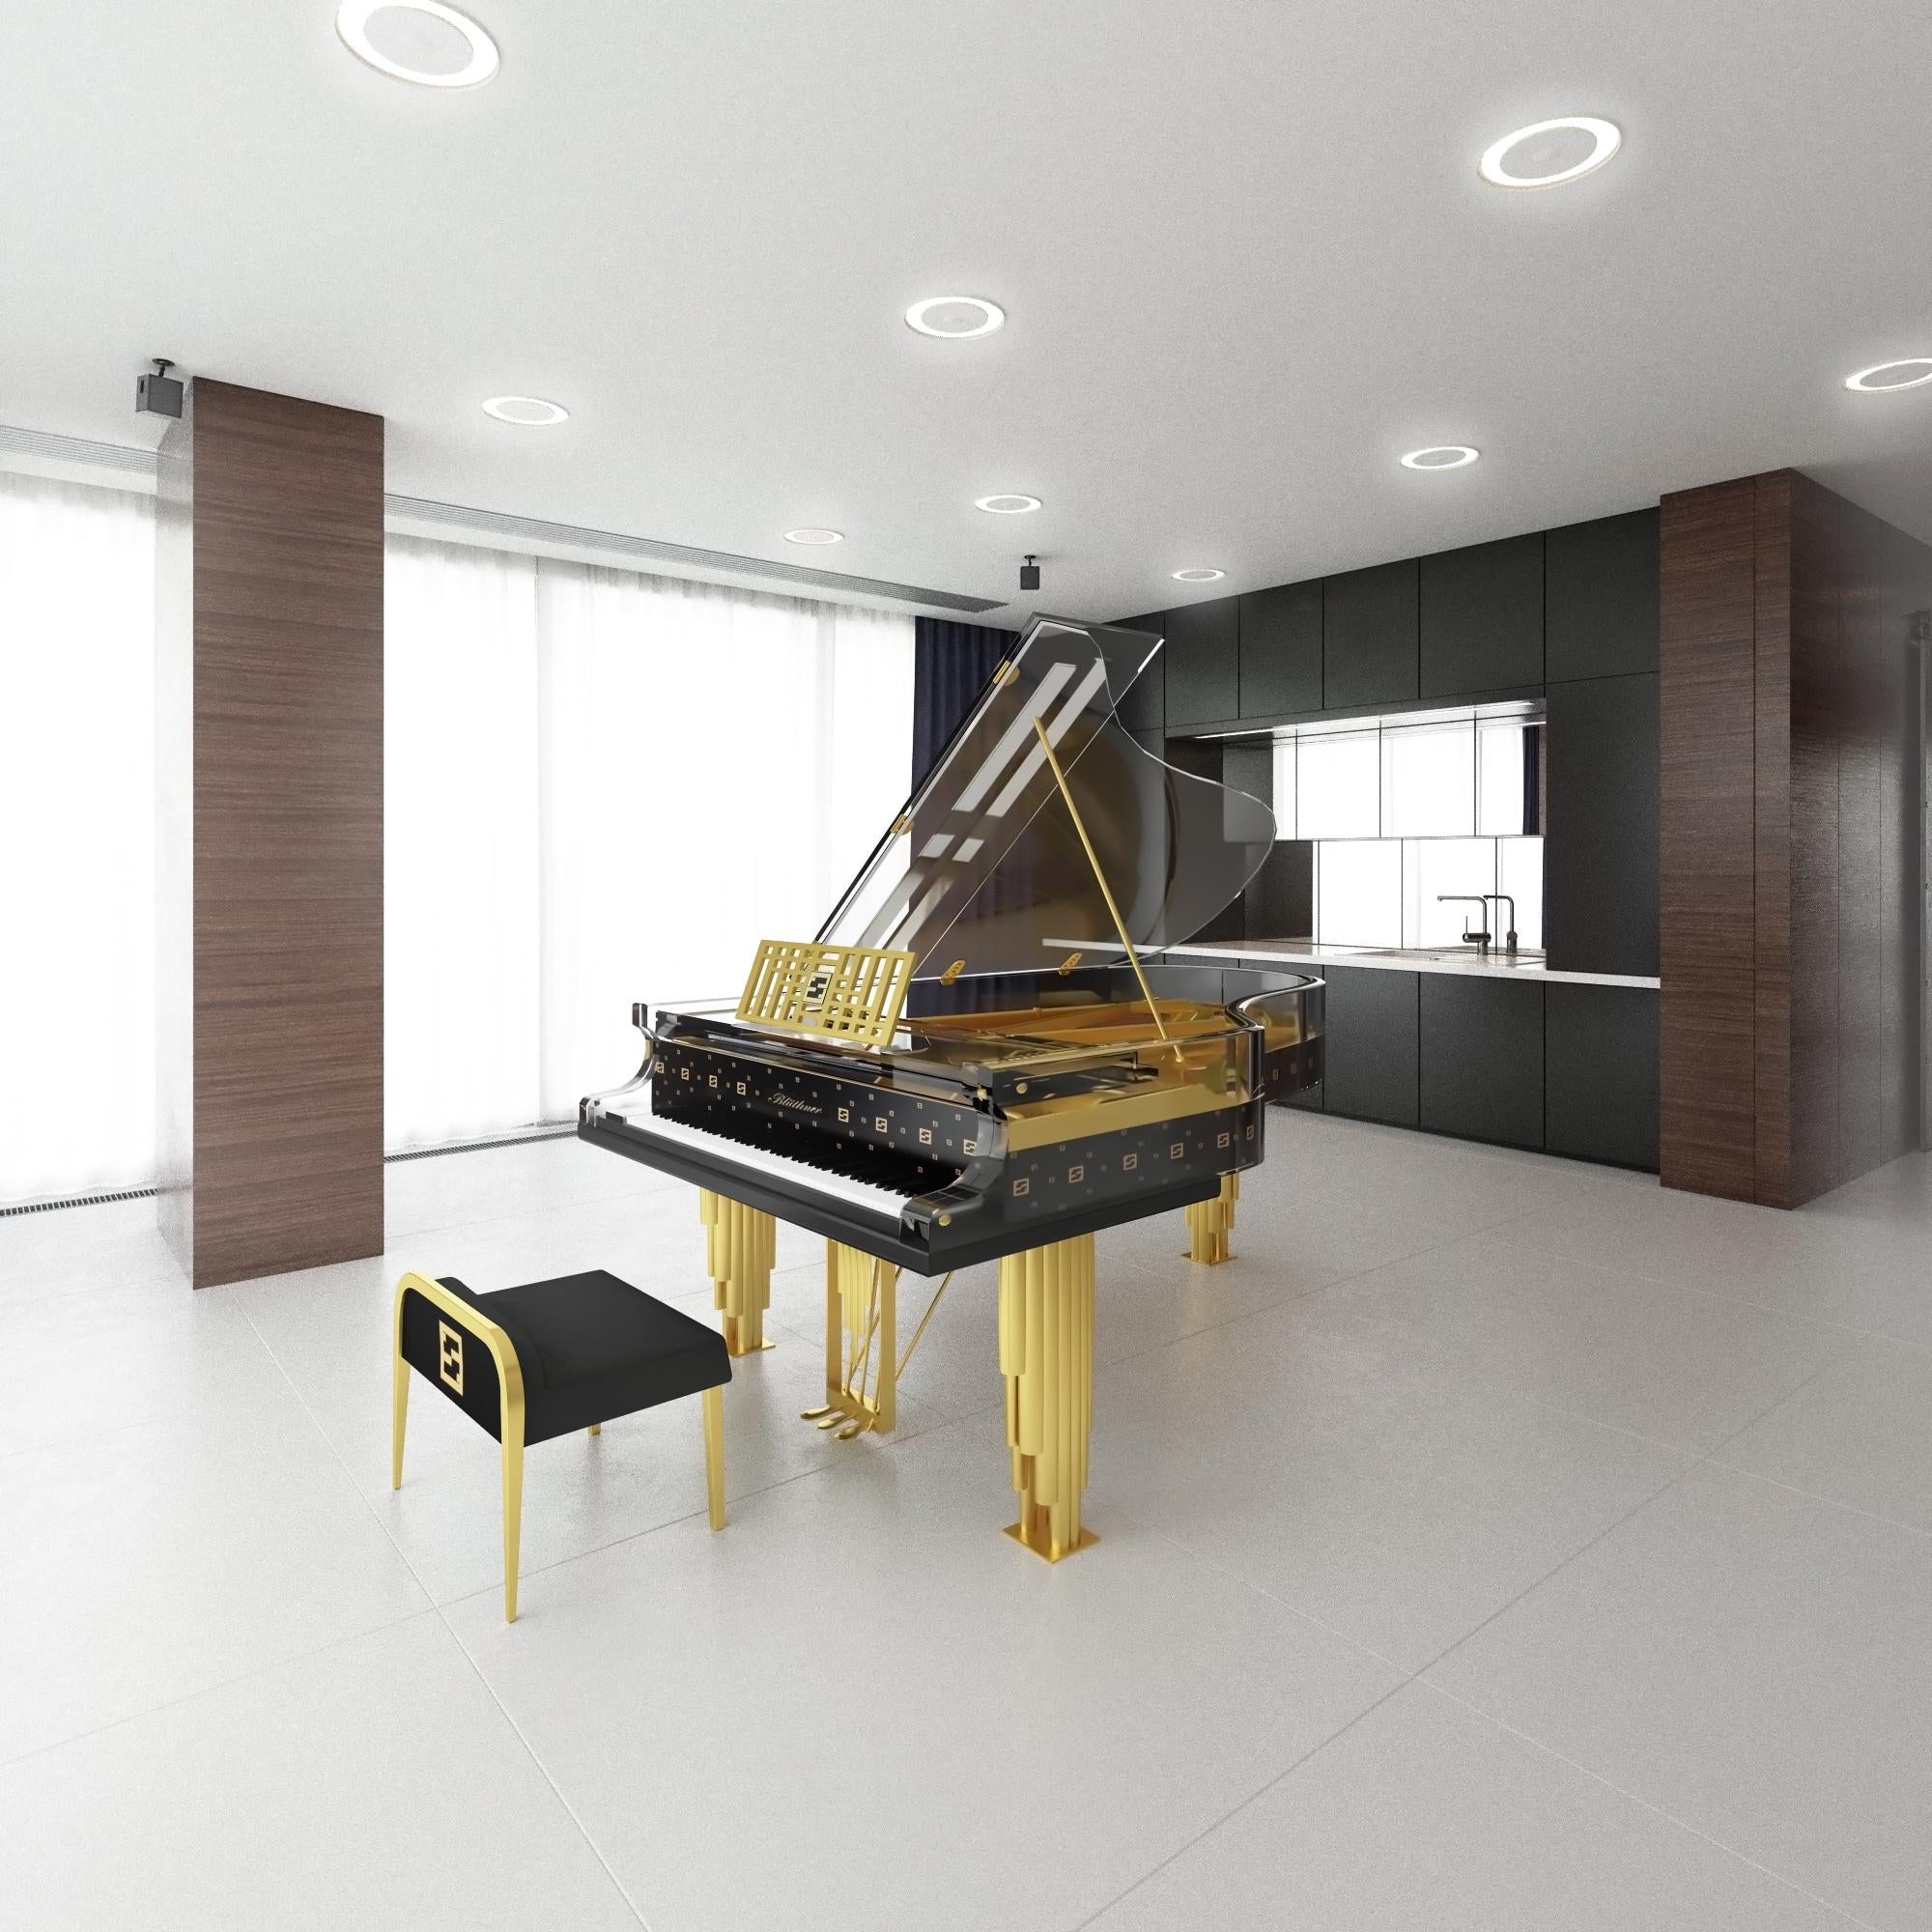 Skilled craftsmanship, in unison with premium quality components that embrace the tonal philosophy of Blüthner, combined with the luxury language of design by Fertini Casa, have produced the extraordinary in Piano Manufacturing Excellence:

The